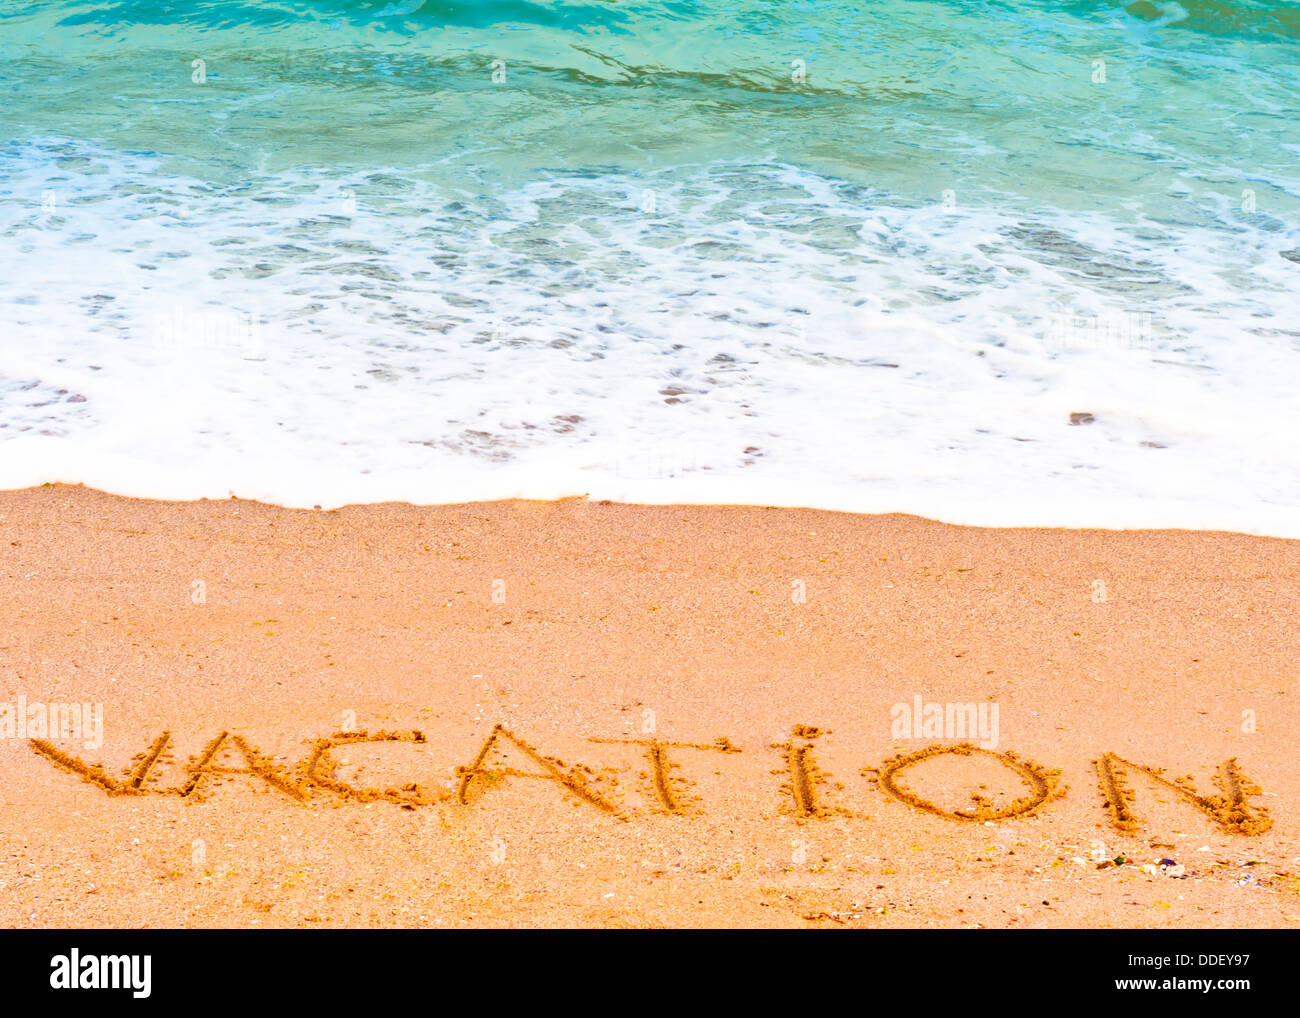 Vacation ; written in the sand on the beach blue waves in the background Stock Photo